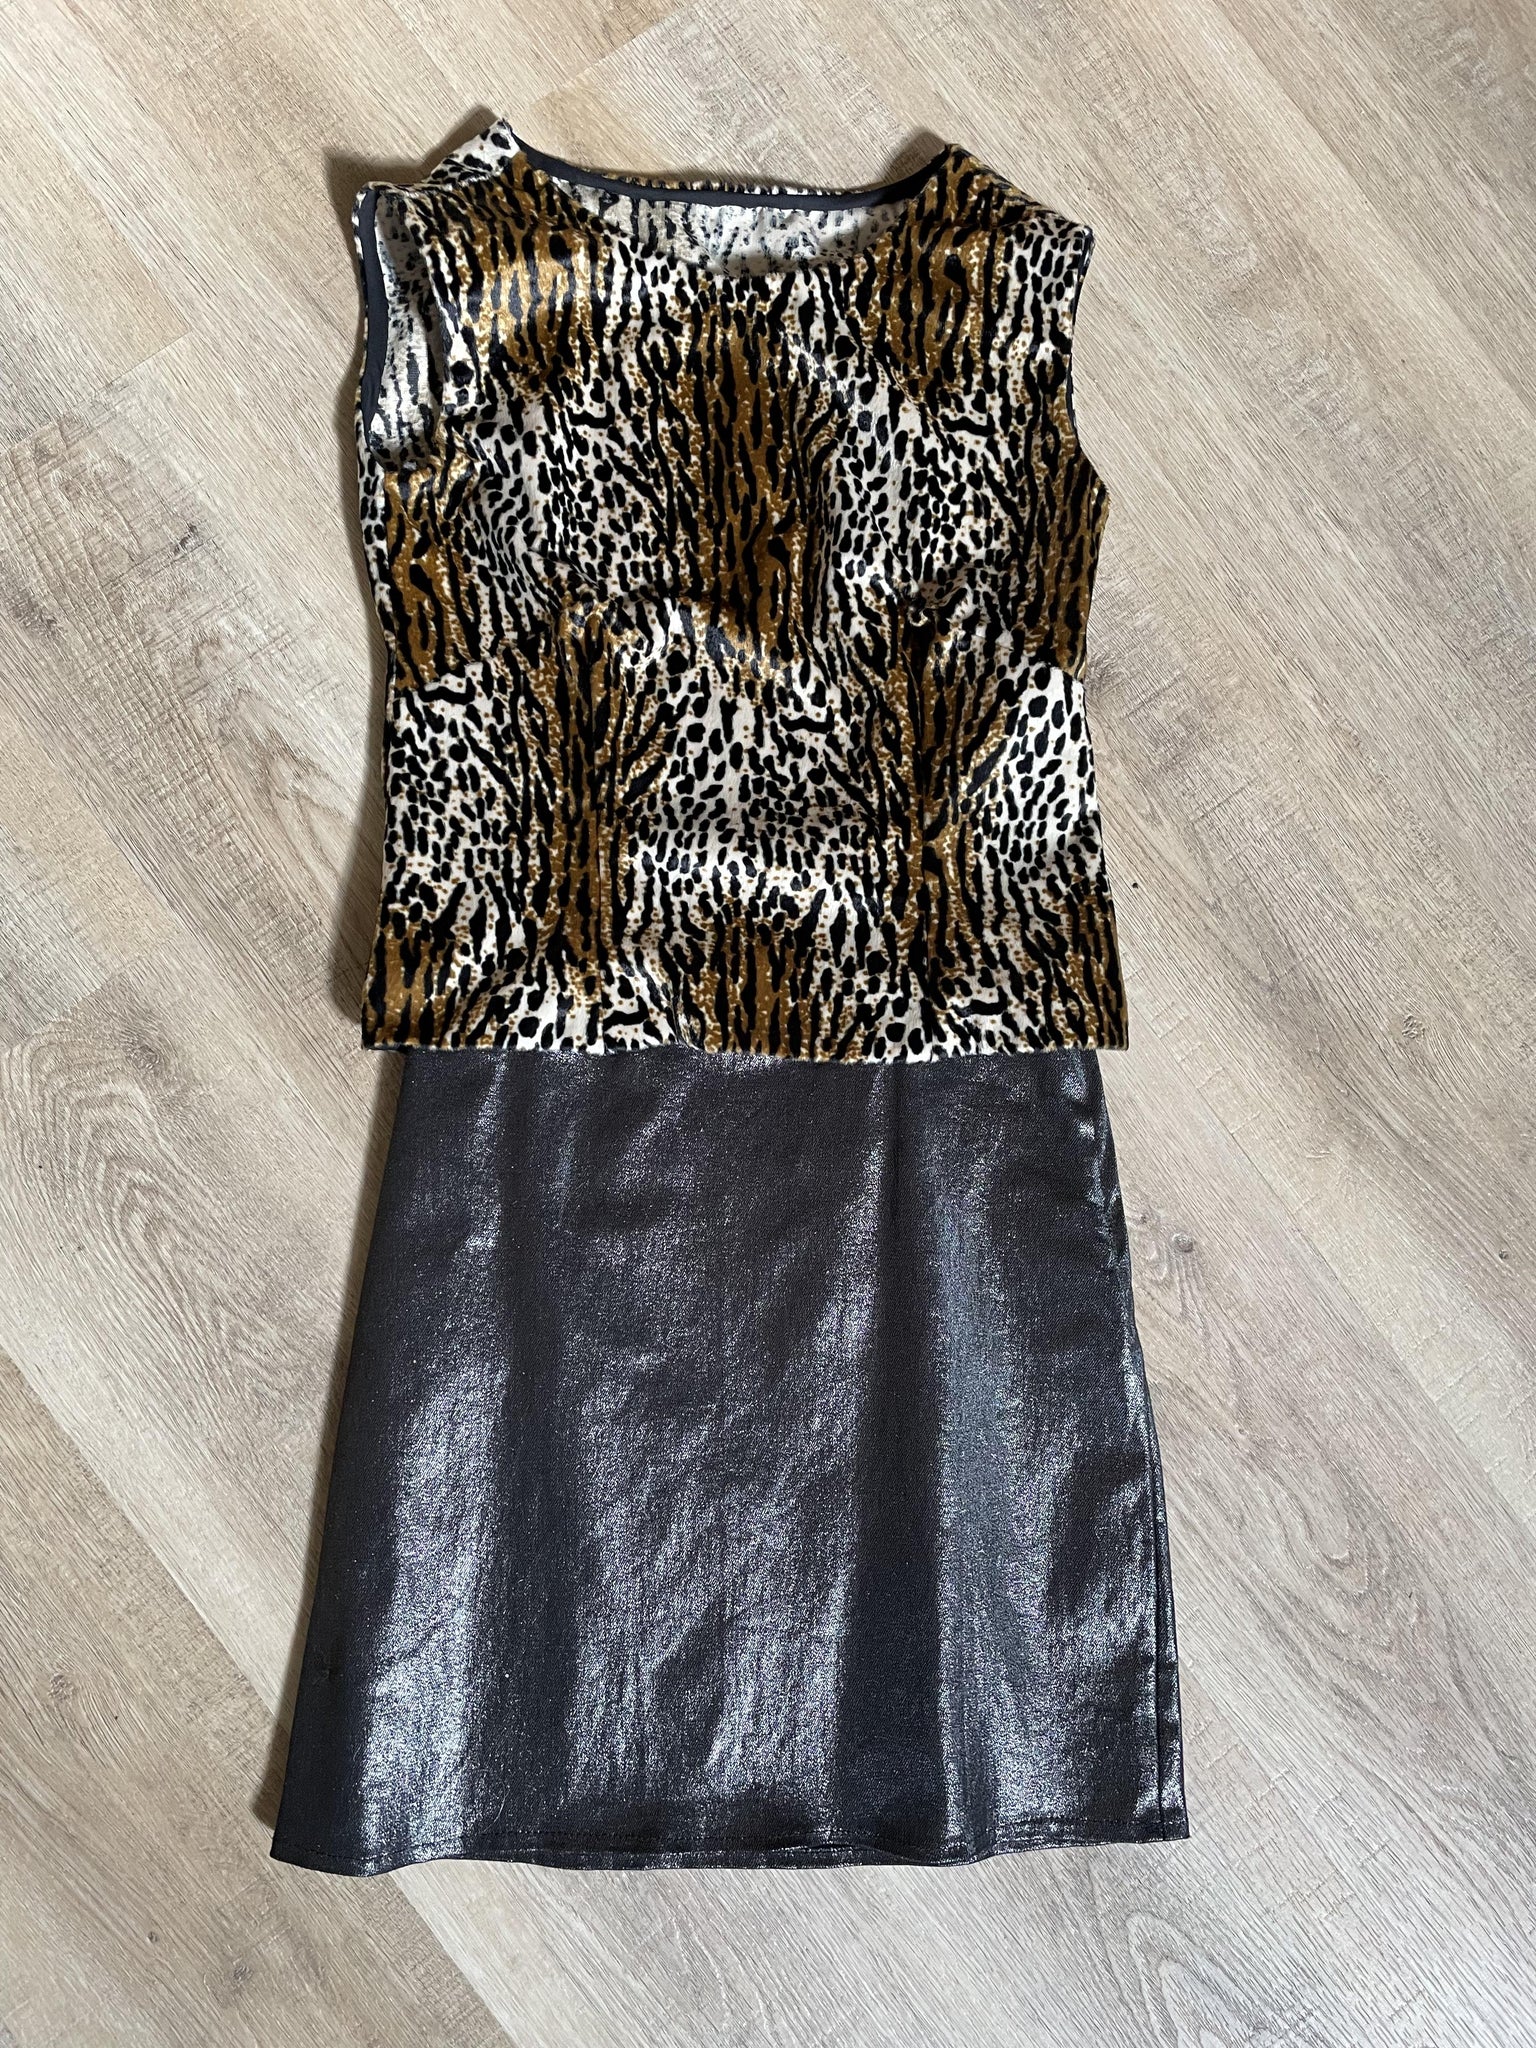 Designer - Faux leather skirt & top